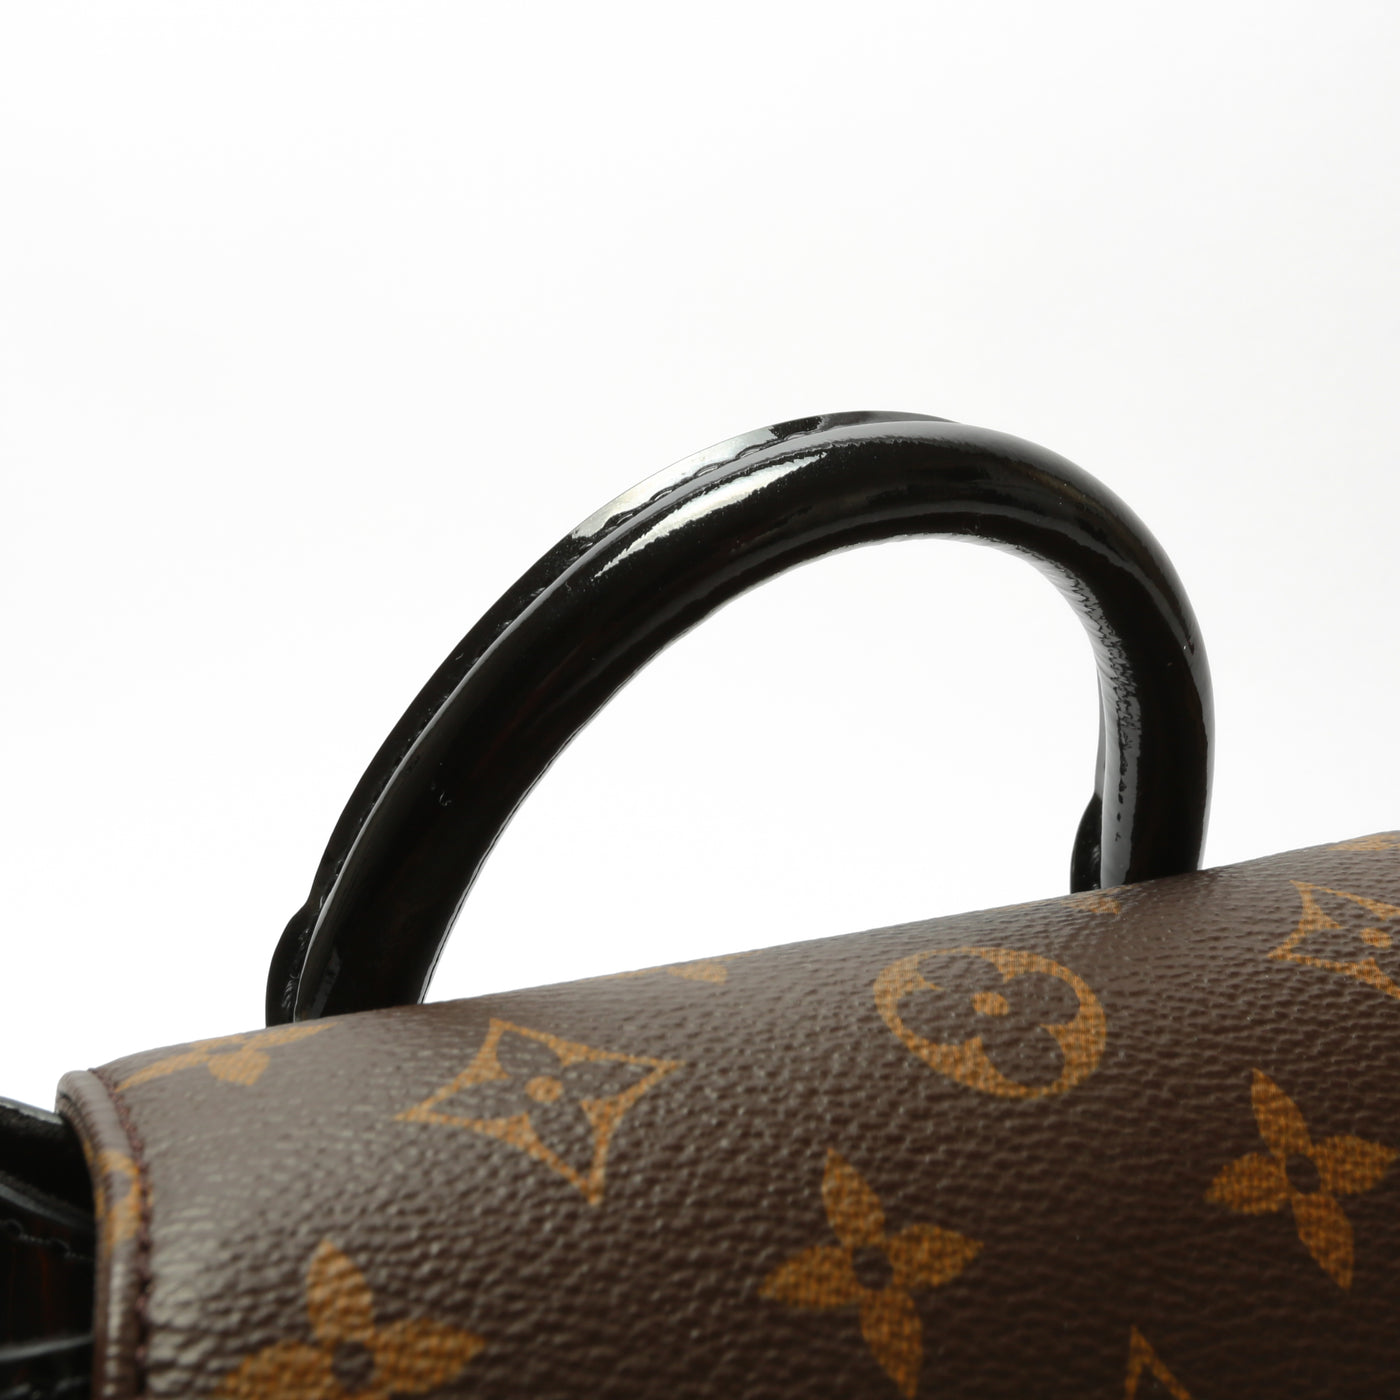 louis vuitton vernis backpack